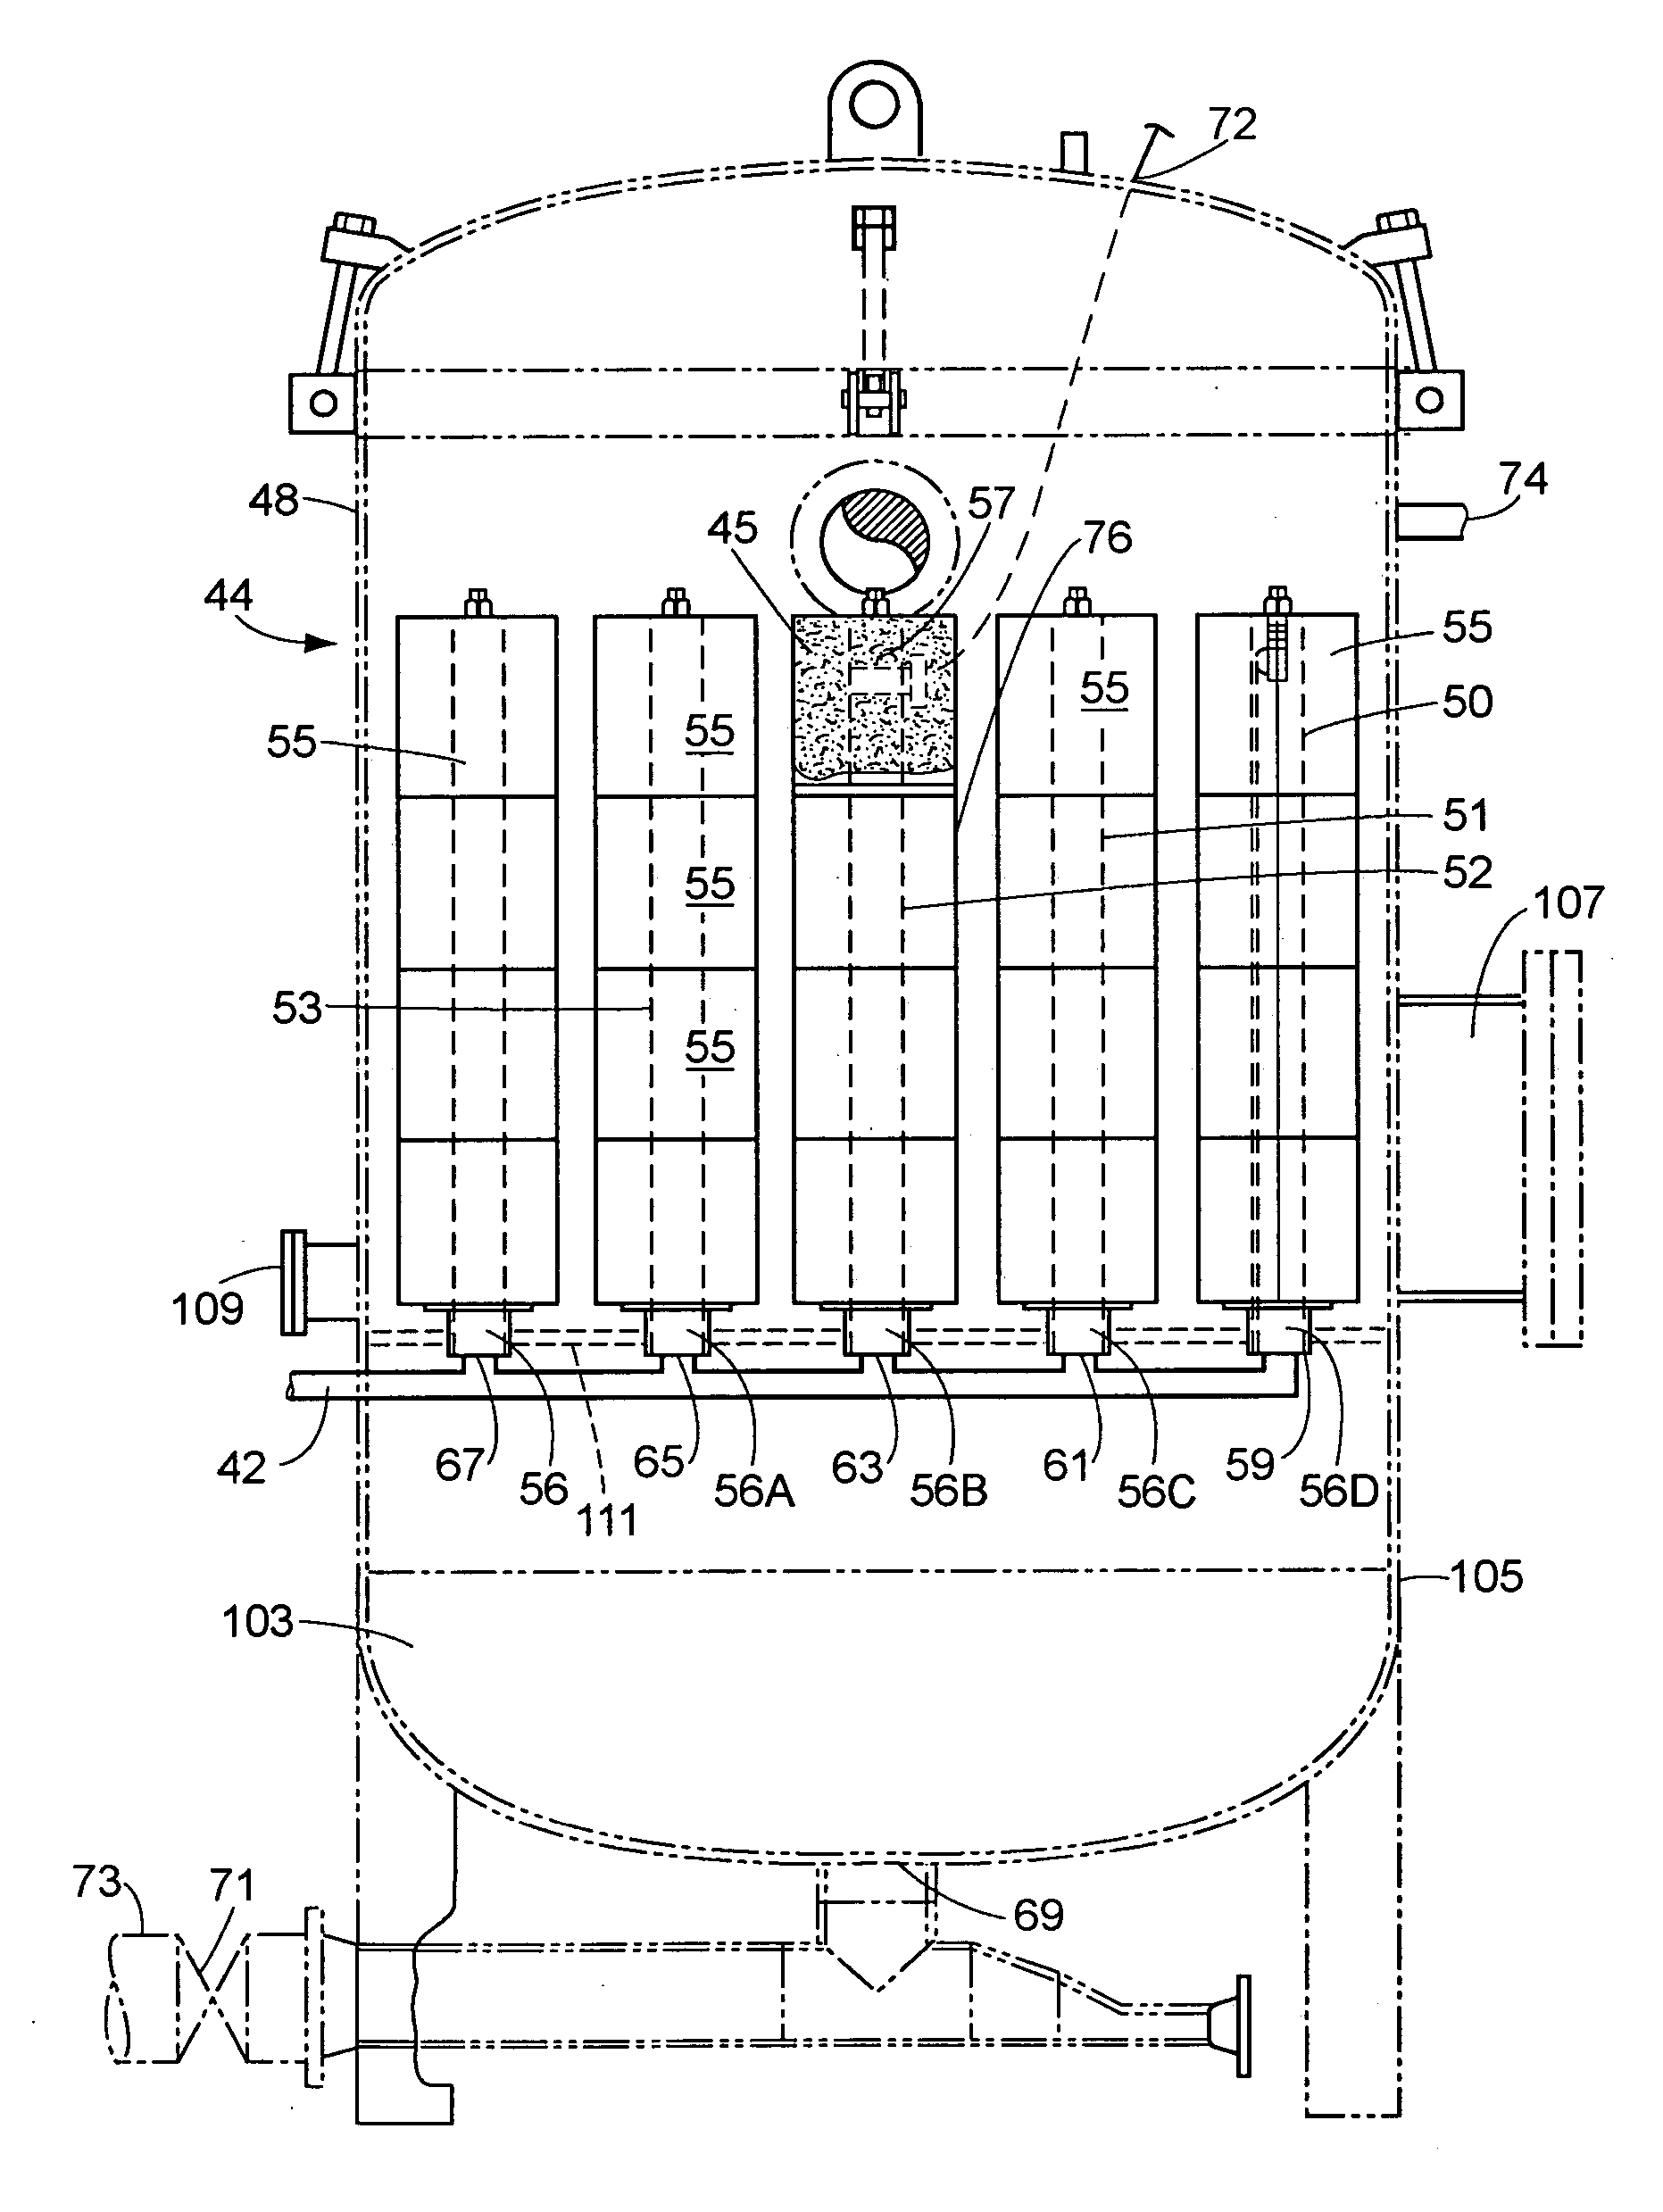 Method for removing oil from water coalescing in a polymer particle/fiber media